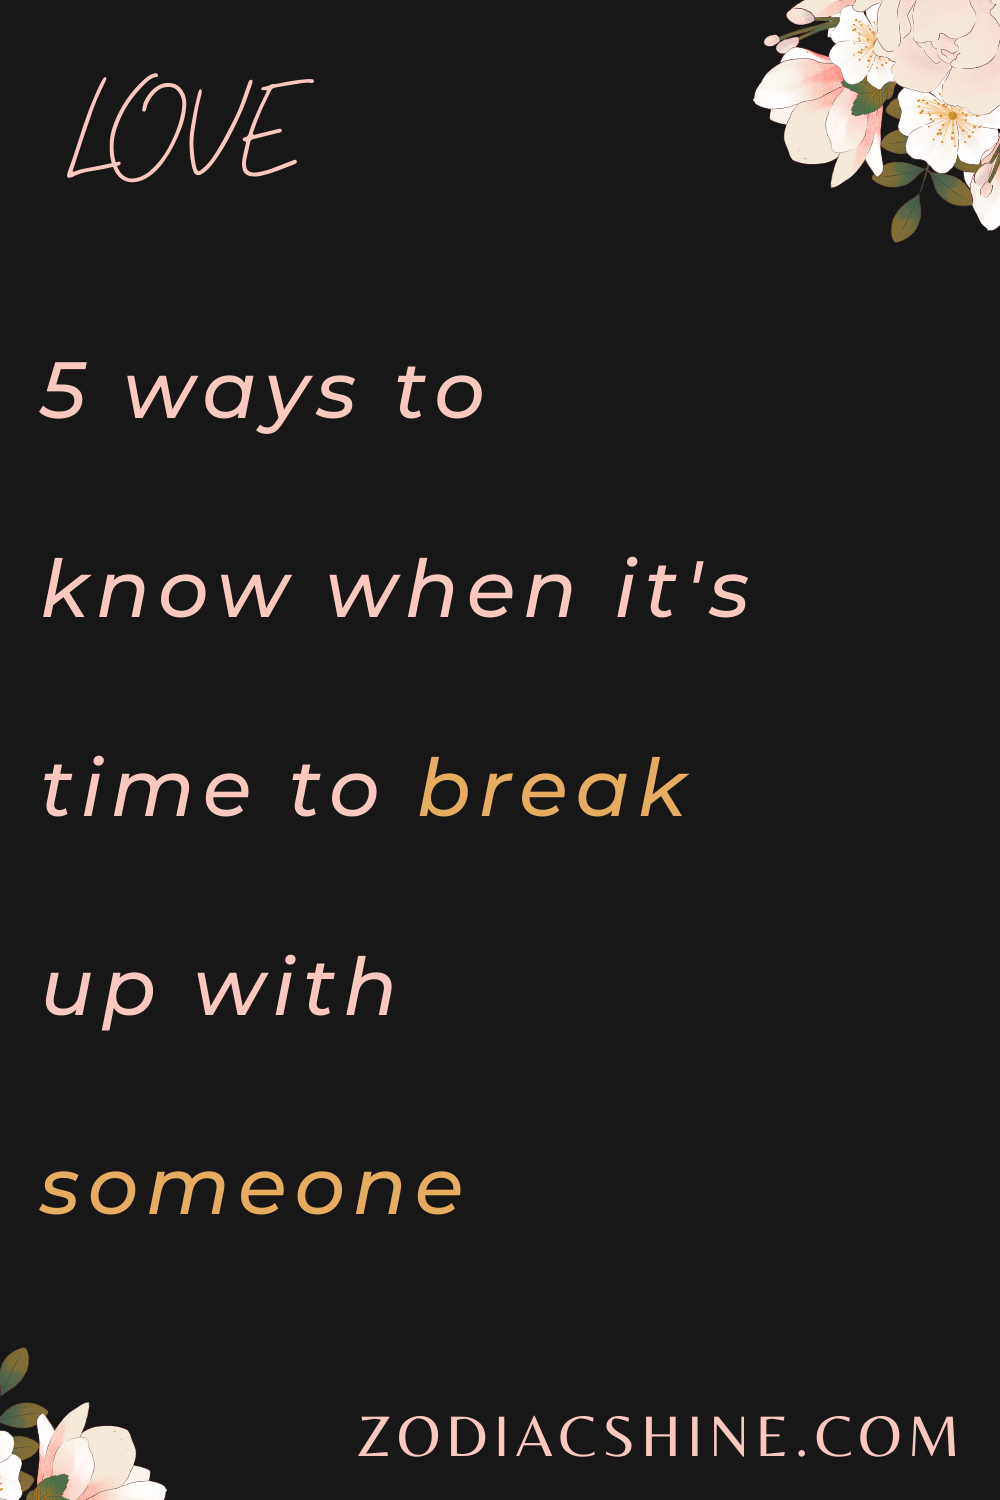 5 ways to know when it's time to break up with someone